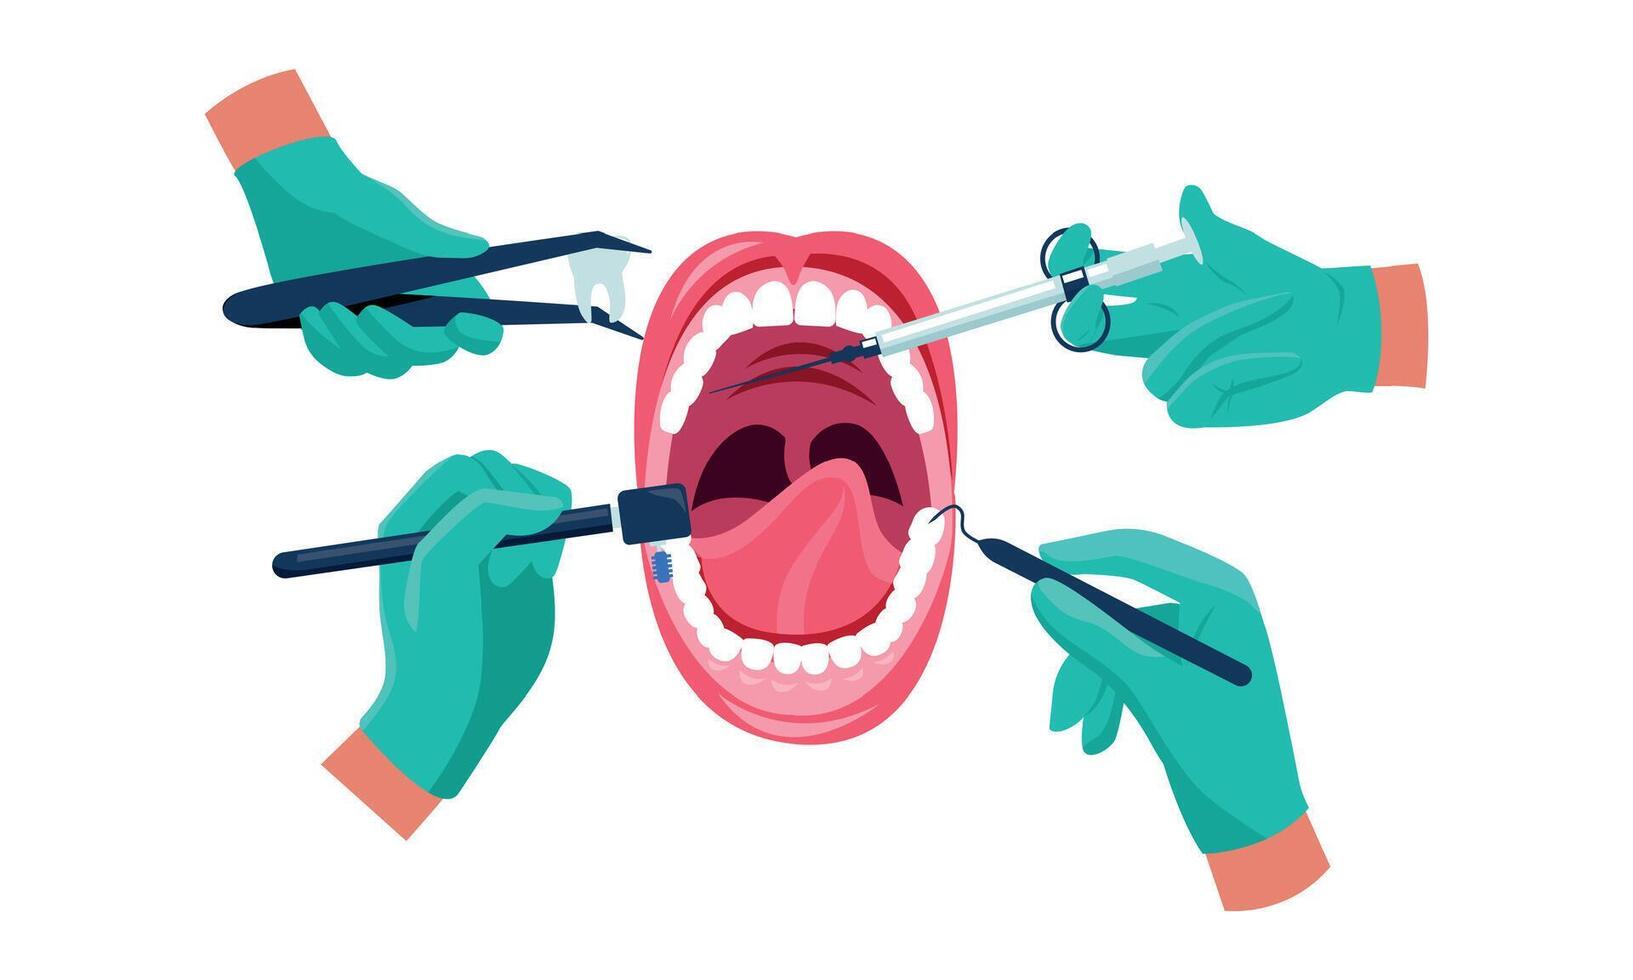 Dental treatment. Dentist hands in medical rubber gloves with instruments working on patient mouth, oral care concept. Vector cartoon illustration